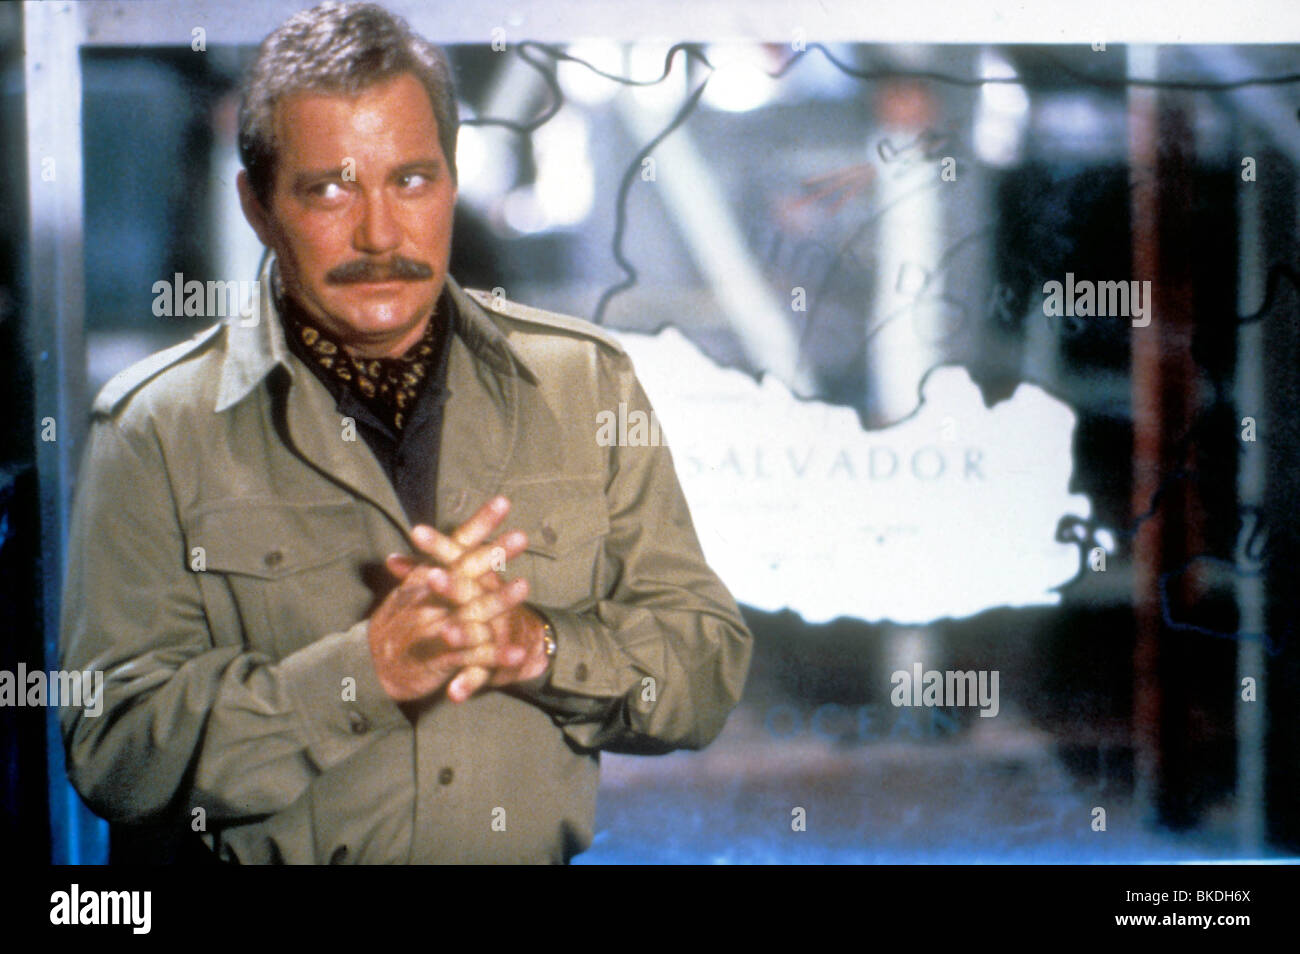 NATIONAL LAMPOON'S caricato arma 1 (1993) William Shatner NLW 028 D Foto Stock